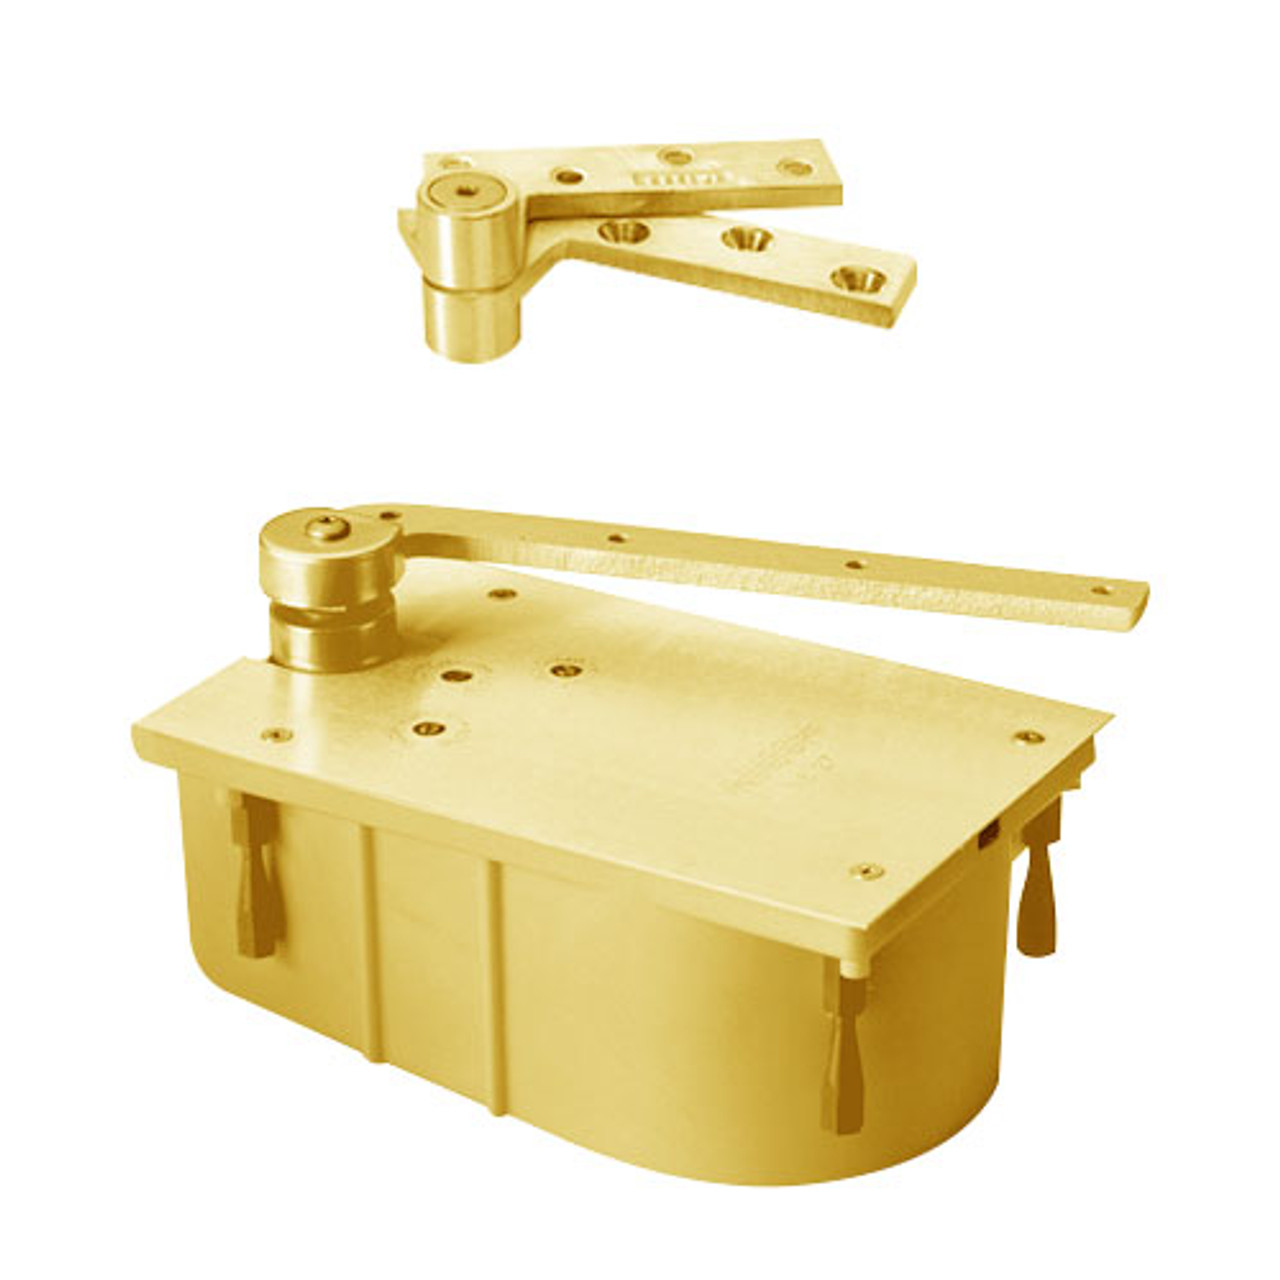 127-85S-LFP-CWF-LH-605 Rixson 27 Series Heavy Duty 3/4" Offset Hung Floor Closer in Bright Brass Finish